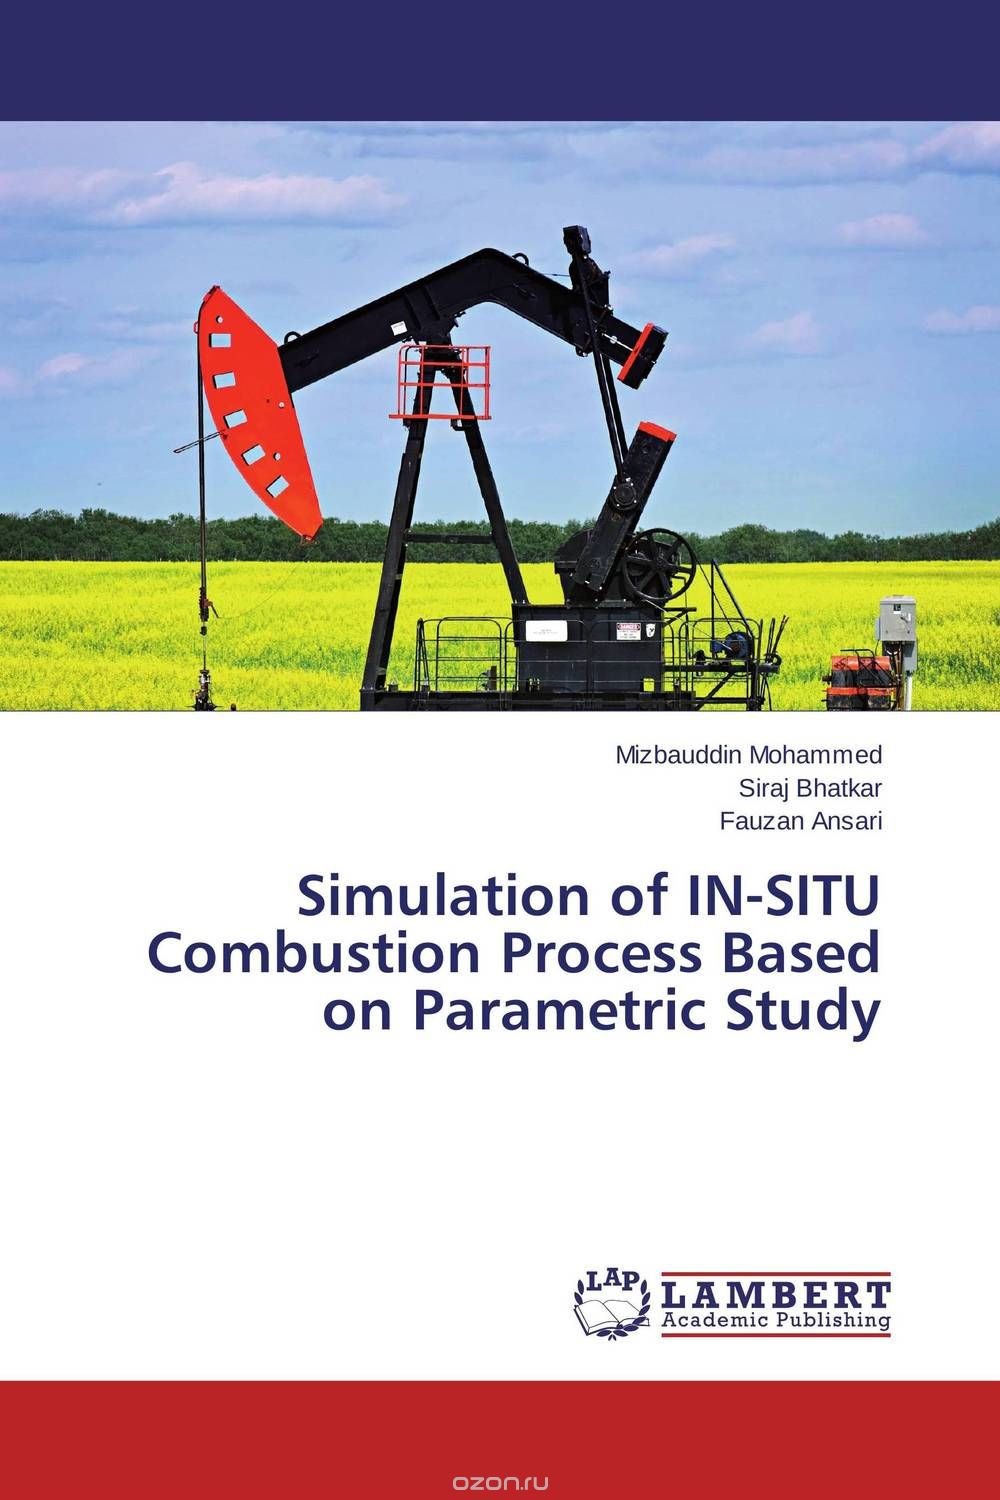 Simulation of IN-SITU Combustion Process Based on Parametric Study